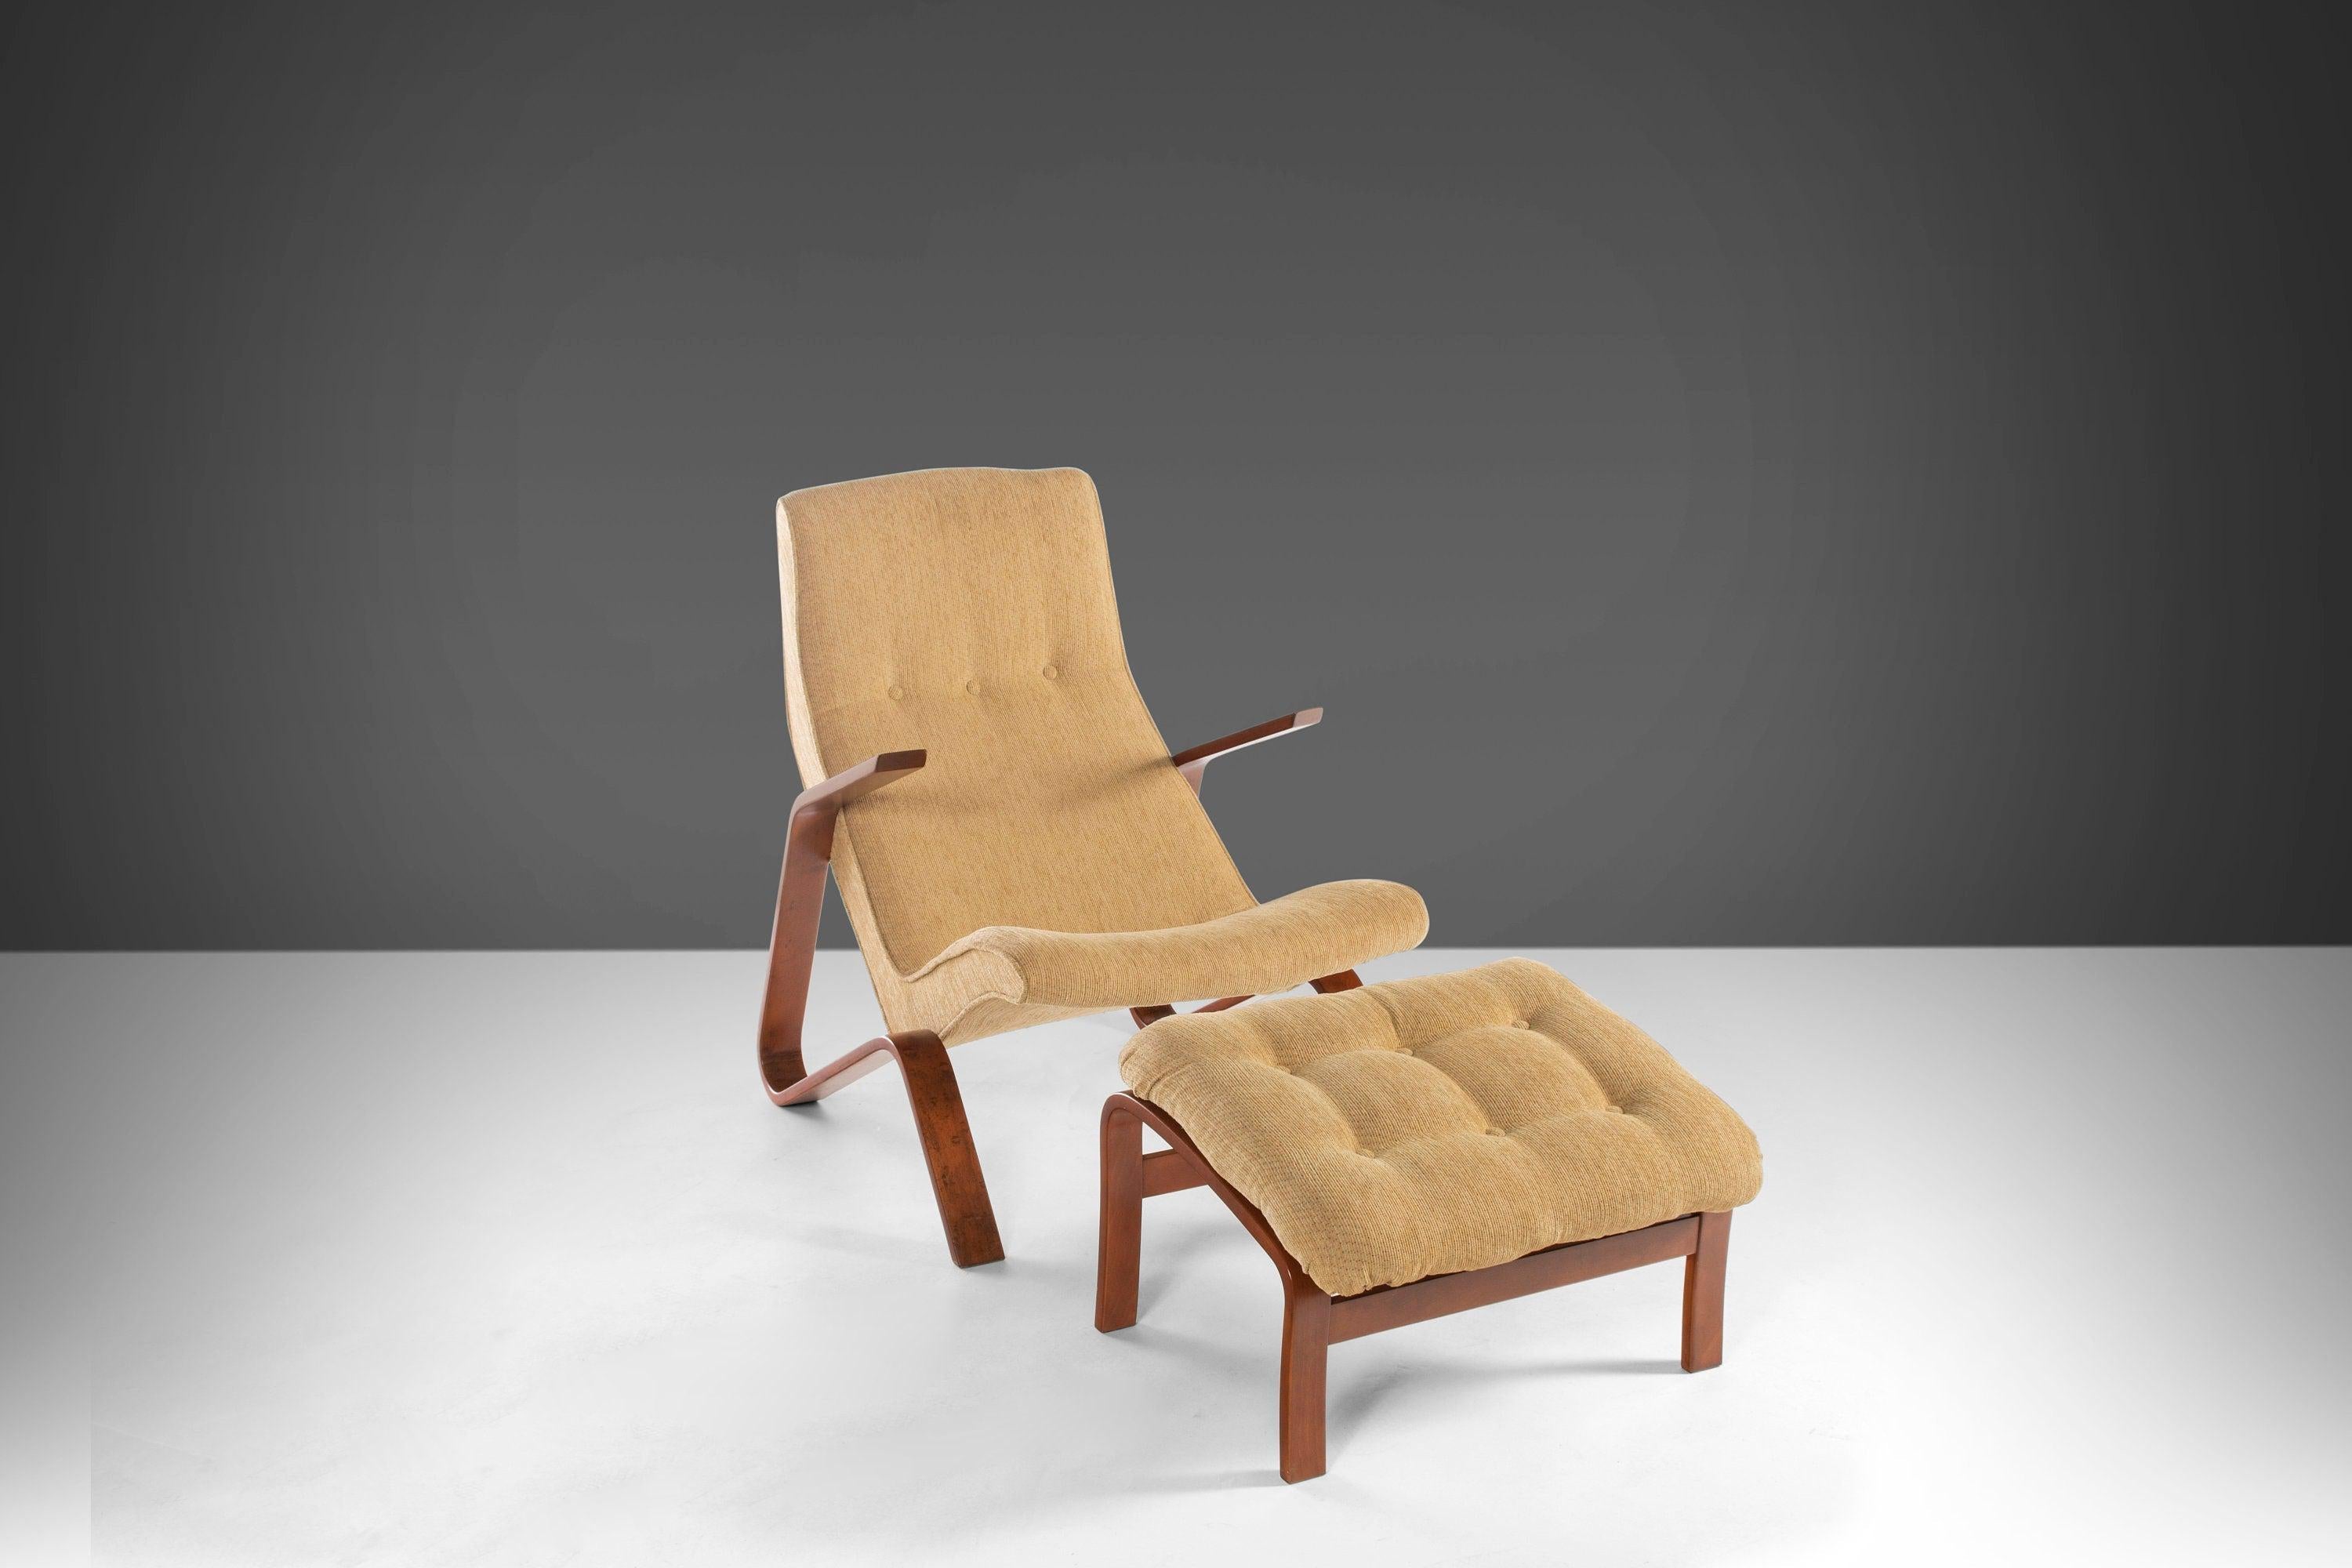 Late 20th Century Grasshopper Chair and Ottoman Attributed to Eero Saarinen for Knoll, USA